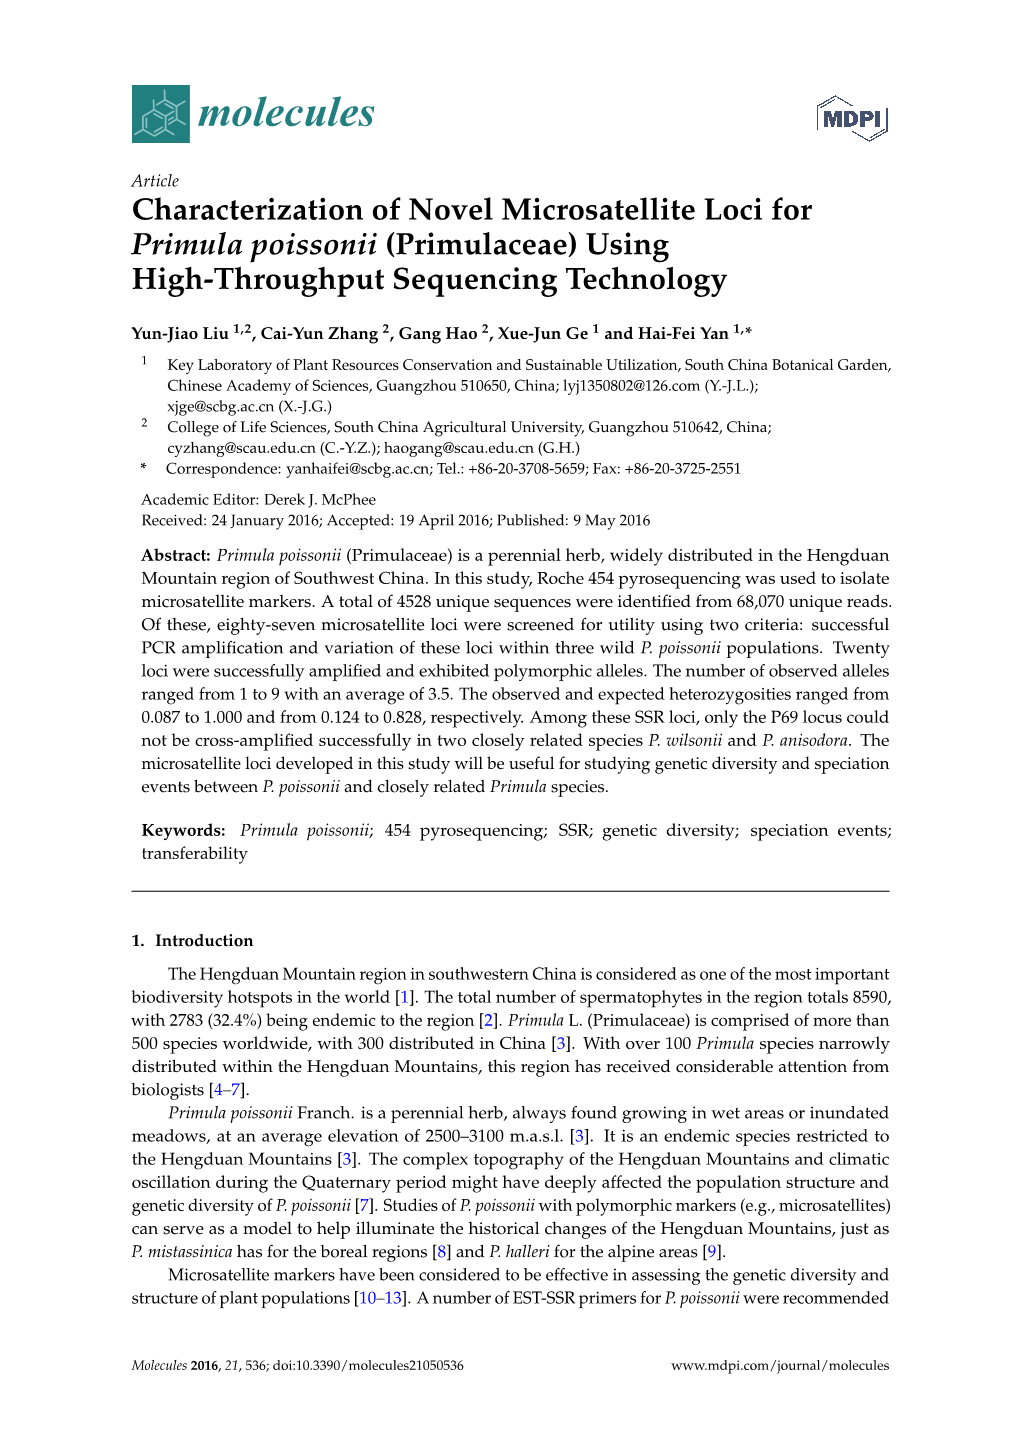 Characterization of Novel Microsatellite Loci for Primula Poissonii (Primulaceae) Using High-Throughput Sequencing Technology